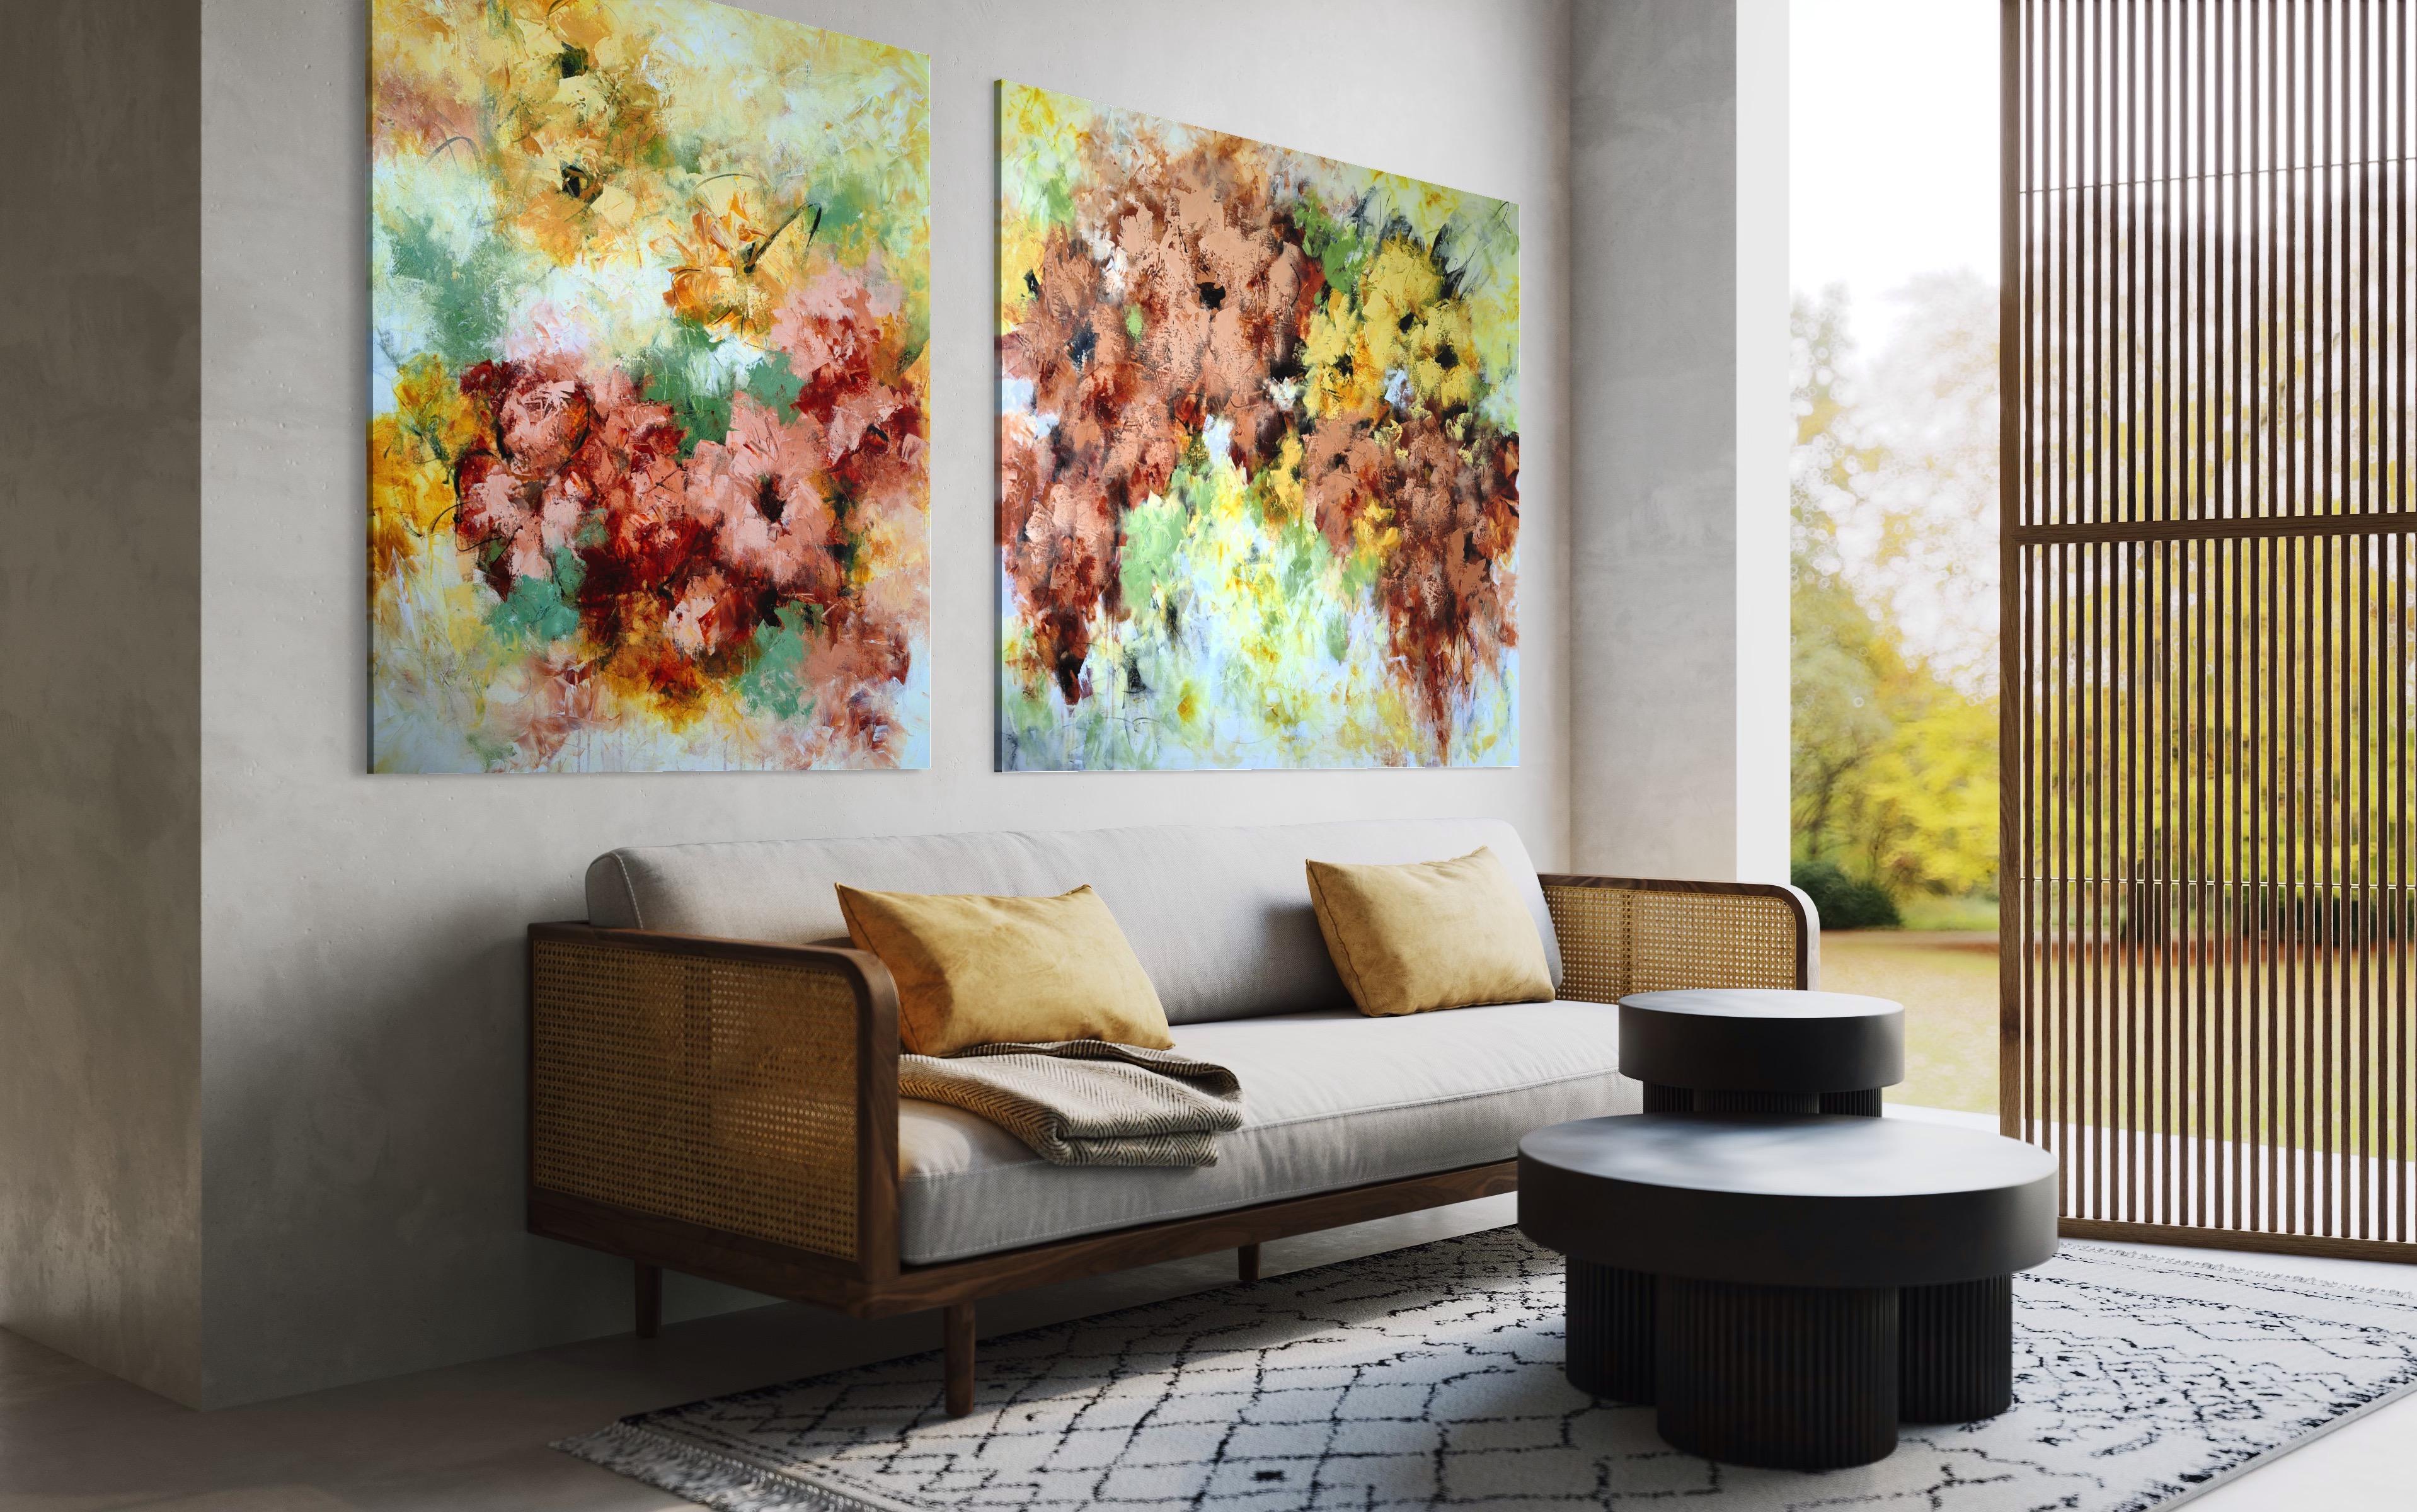 Abstract Painting Vera Hoi - Extra large peinture florale texturée Enchanted Blooms III, XXL Diptyque